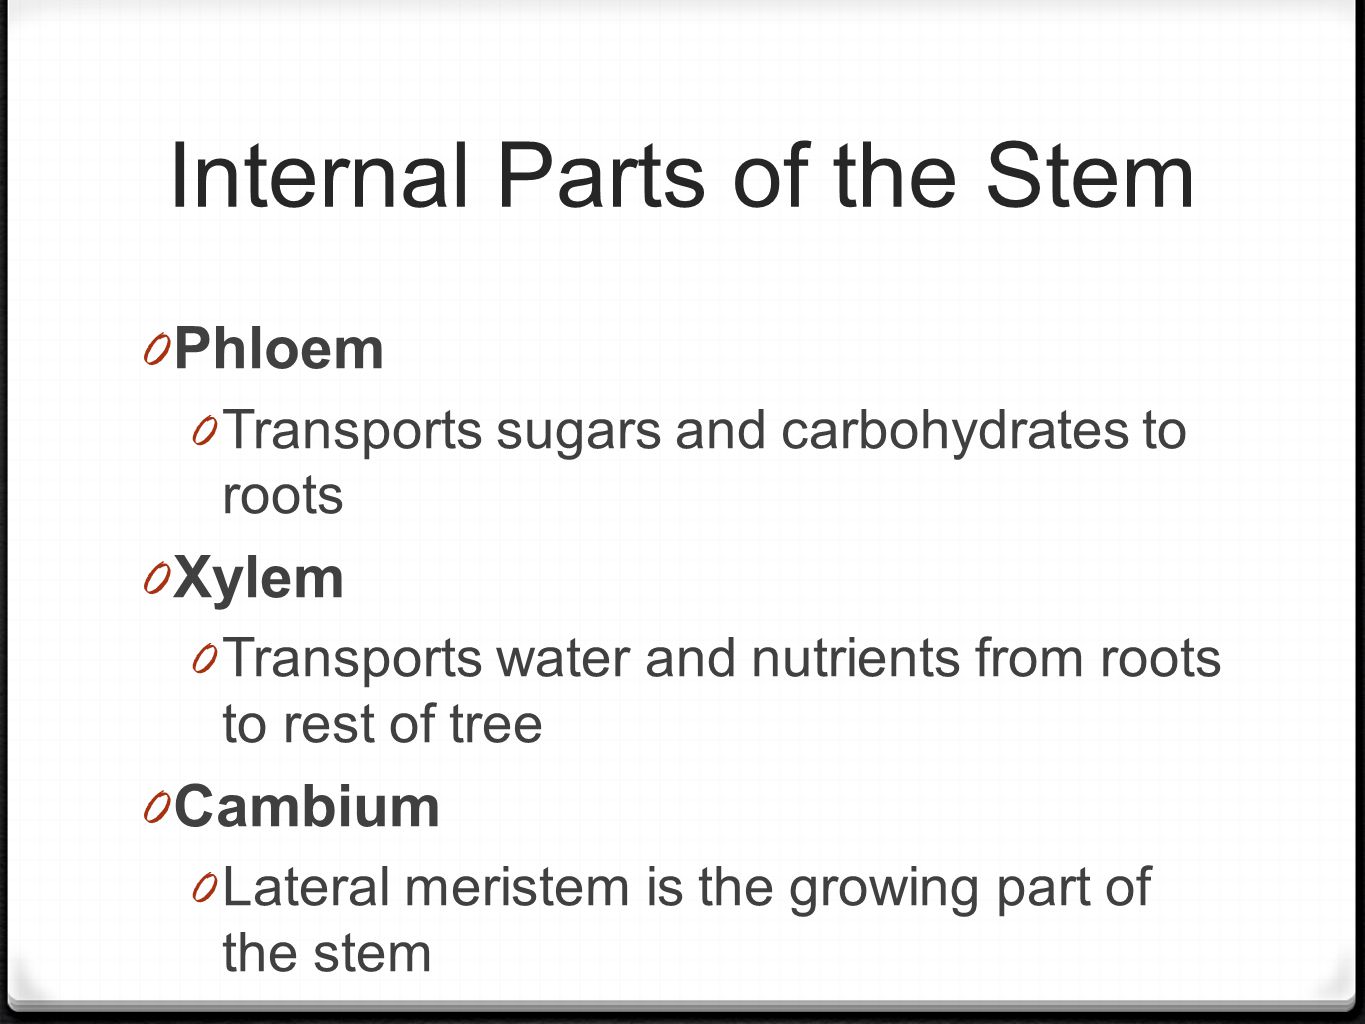 Internal Parts of the Stem 0 Phloem 0 Transports sugars and carbohydrates to roots 0 Xylem 0 Transports water and nutrients from roots to rest of tree 0 Cambium 0 Lateral meristem is the growing part of the stem